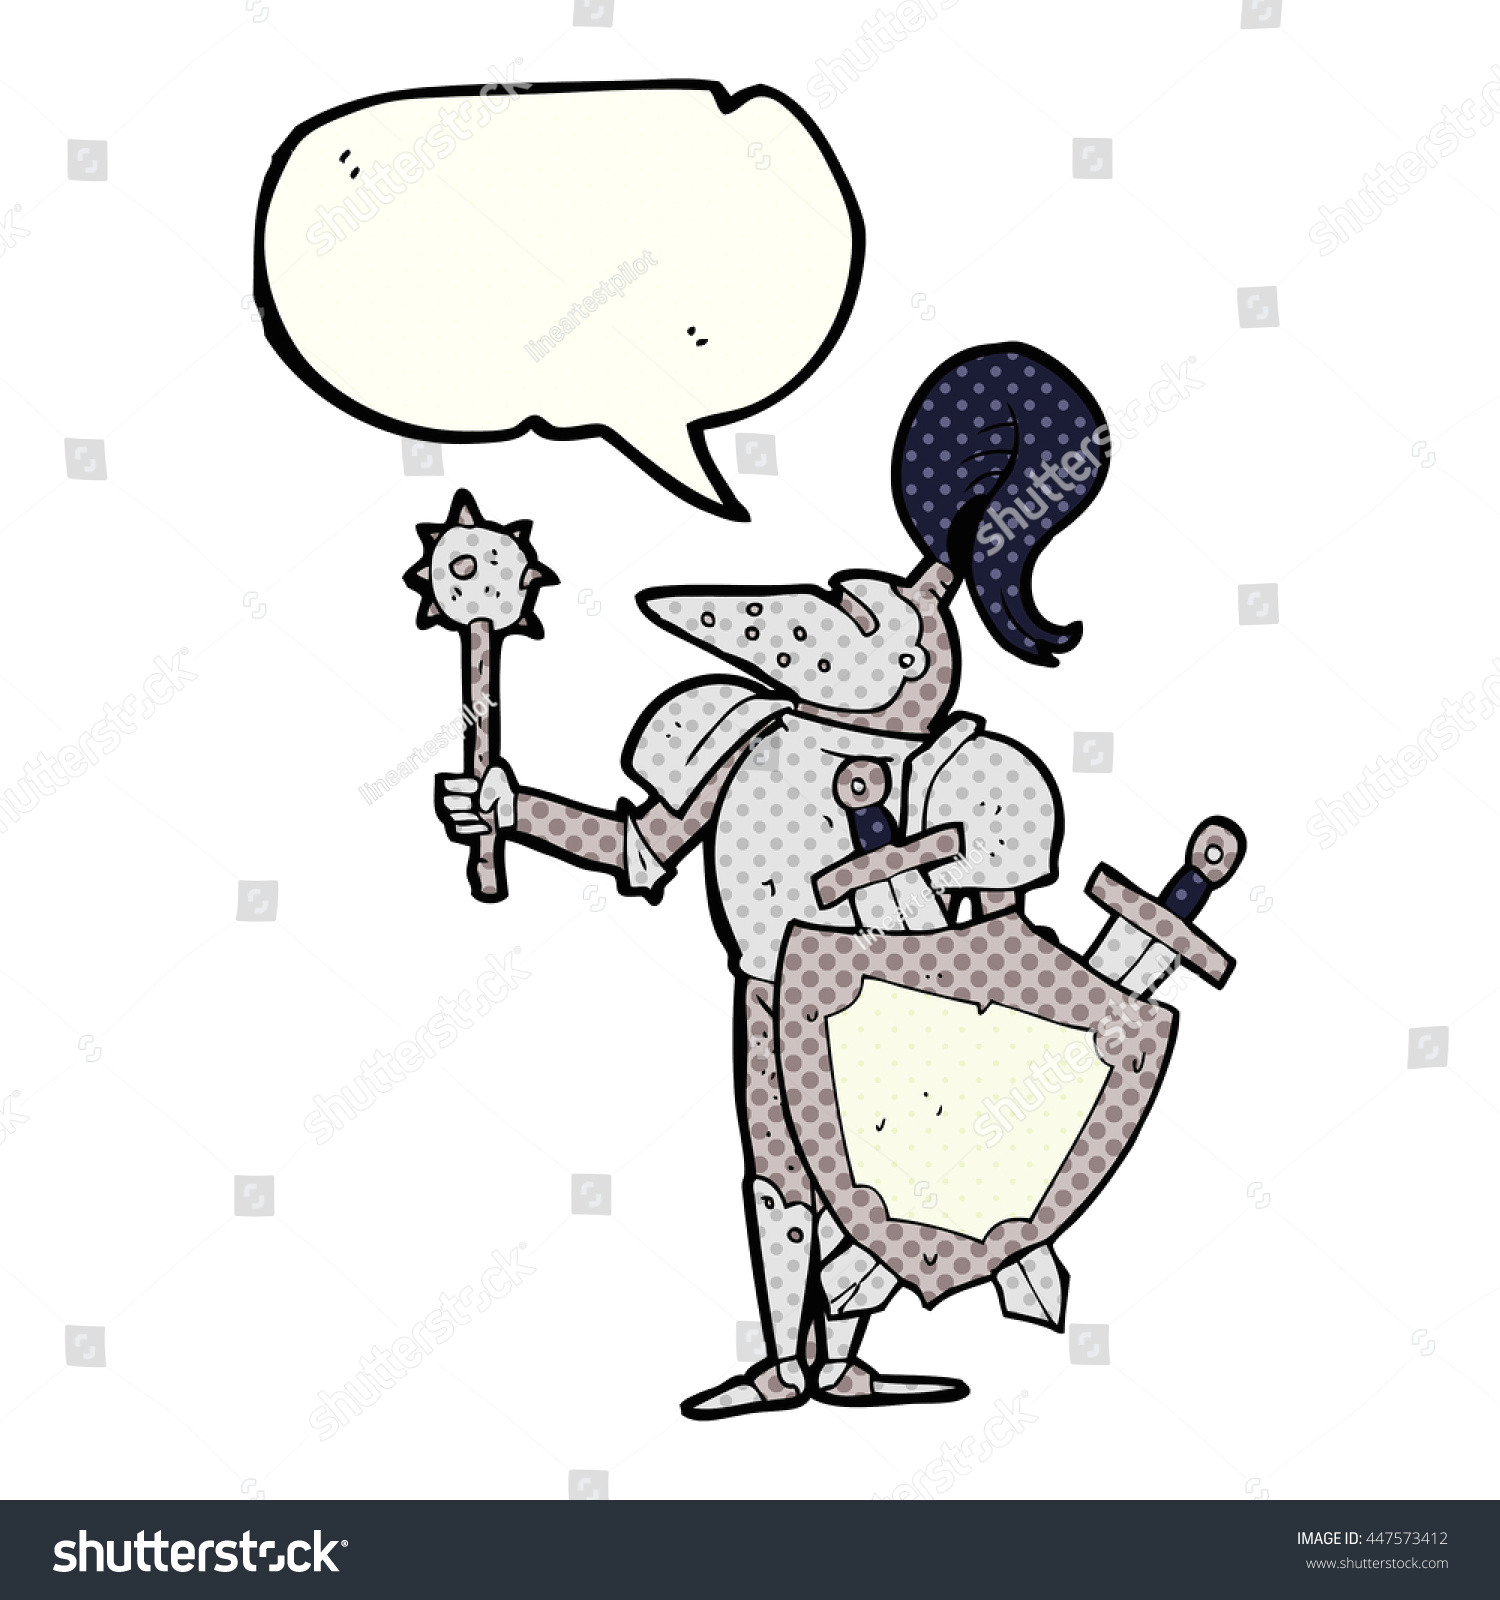 freehand drawn comic book speech bubble cartoon medieval knight with shield